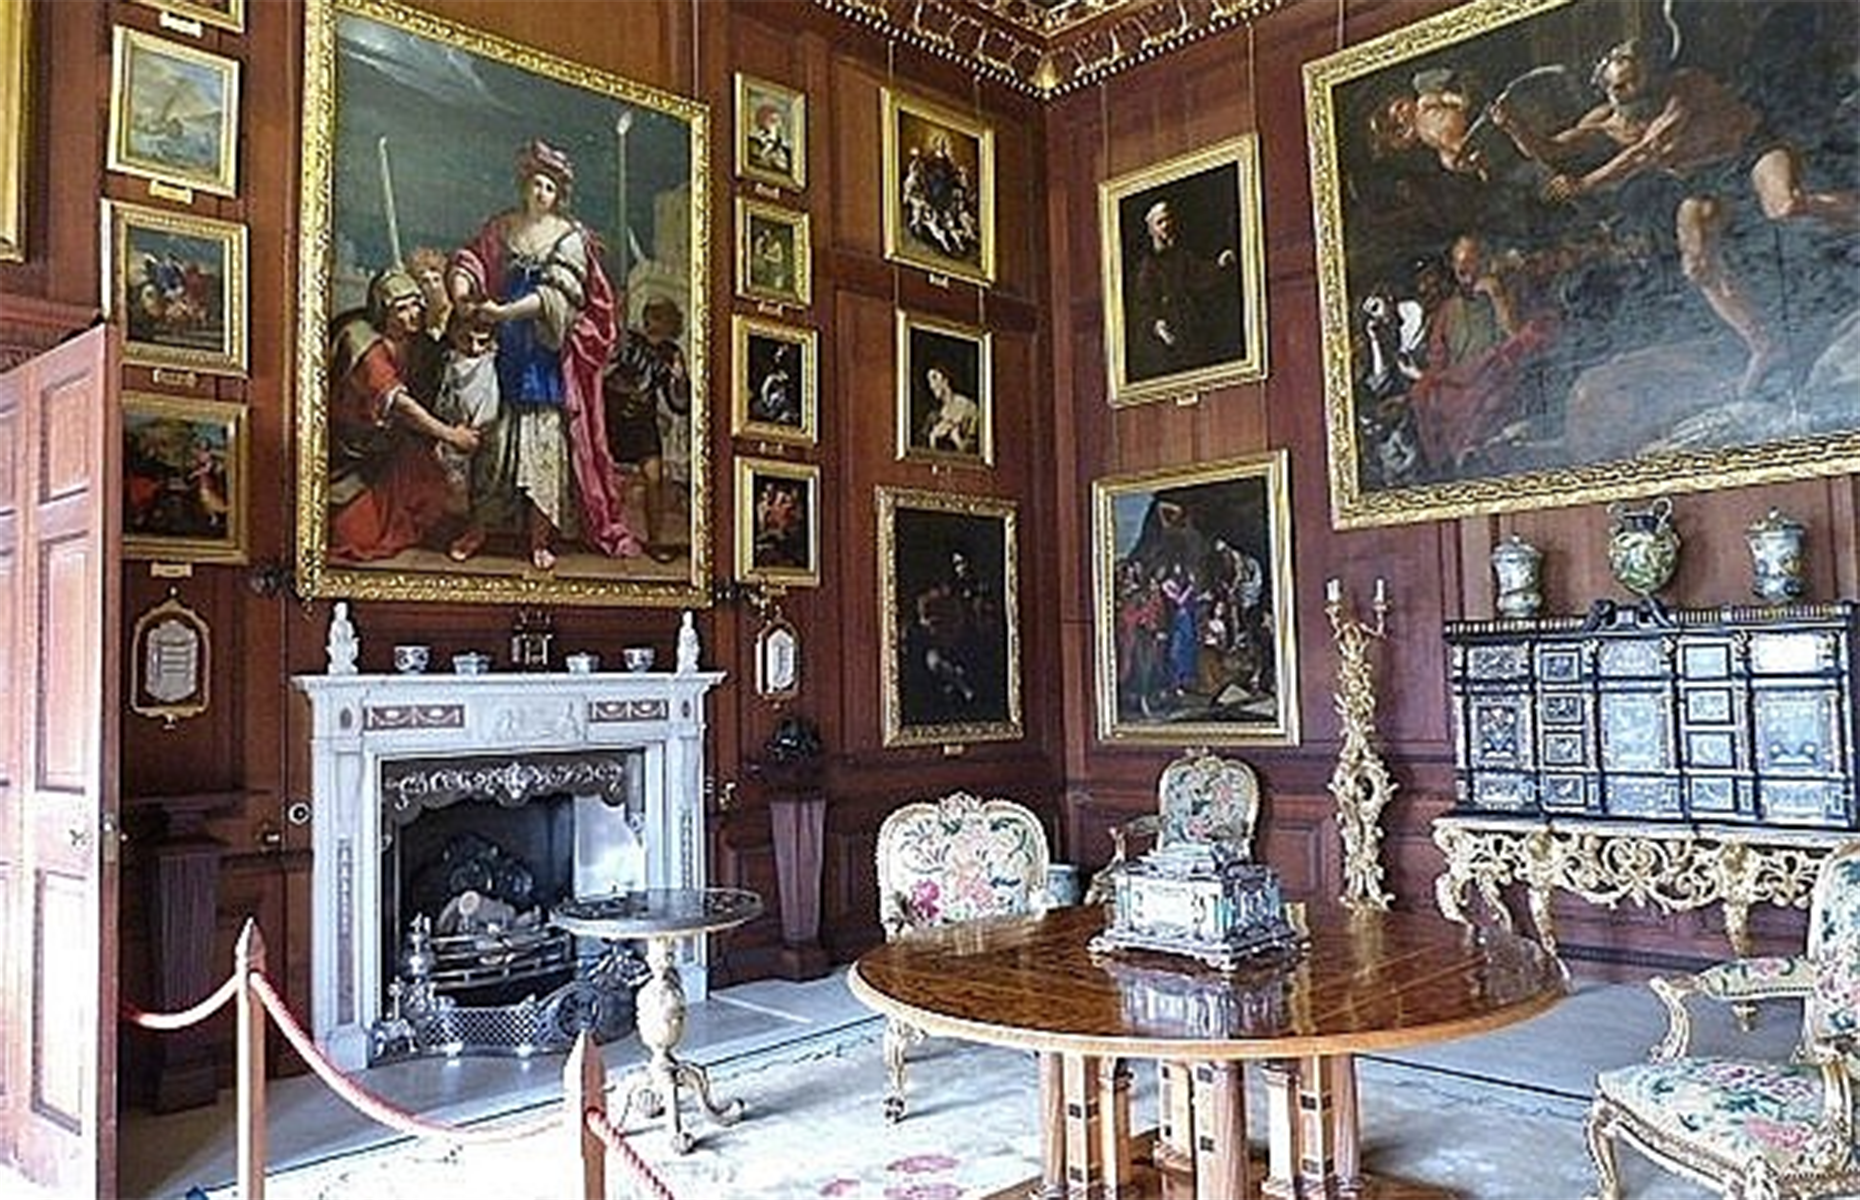 <p>As with most country houses, the First and Second World Wars brought a host of difficulties for Burghley House, which served as a hospital for wounded soldiers during both conflicts.</p>  <p>However, it was one of the first major houses to reopen in 1946, bolstered by <a href="https://www.countrylife.co.uk/architecture/burghley-house-the-500-year-story-of-one-of-the-very-greatest-houses-in-britain-216504">a strongly worded letter</a> from the 5<sup>th</sup> Marchioness demanding tax relief and increased support for maintenance to prevent the dispersal of the home’s historic collections.</p>